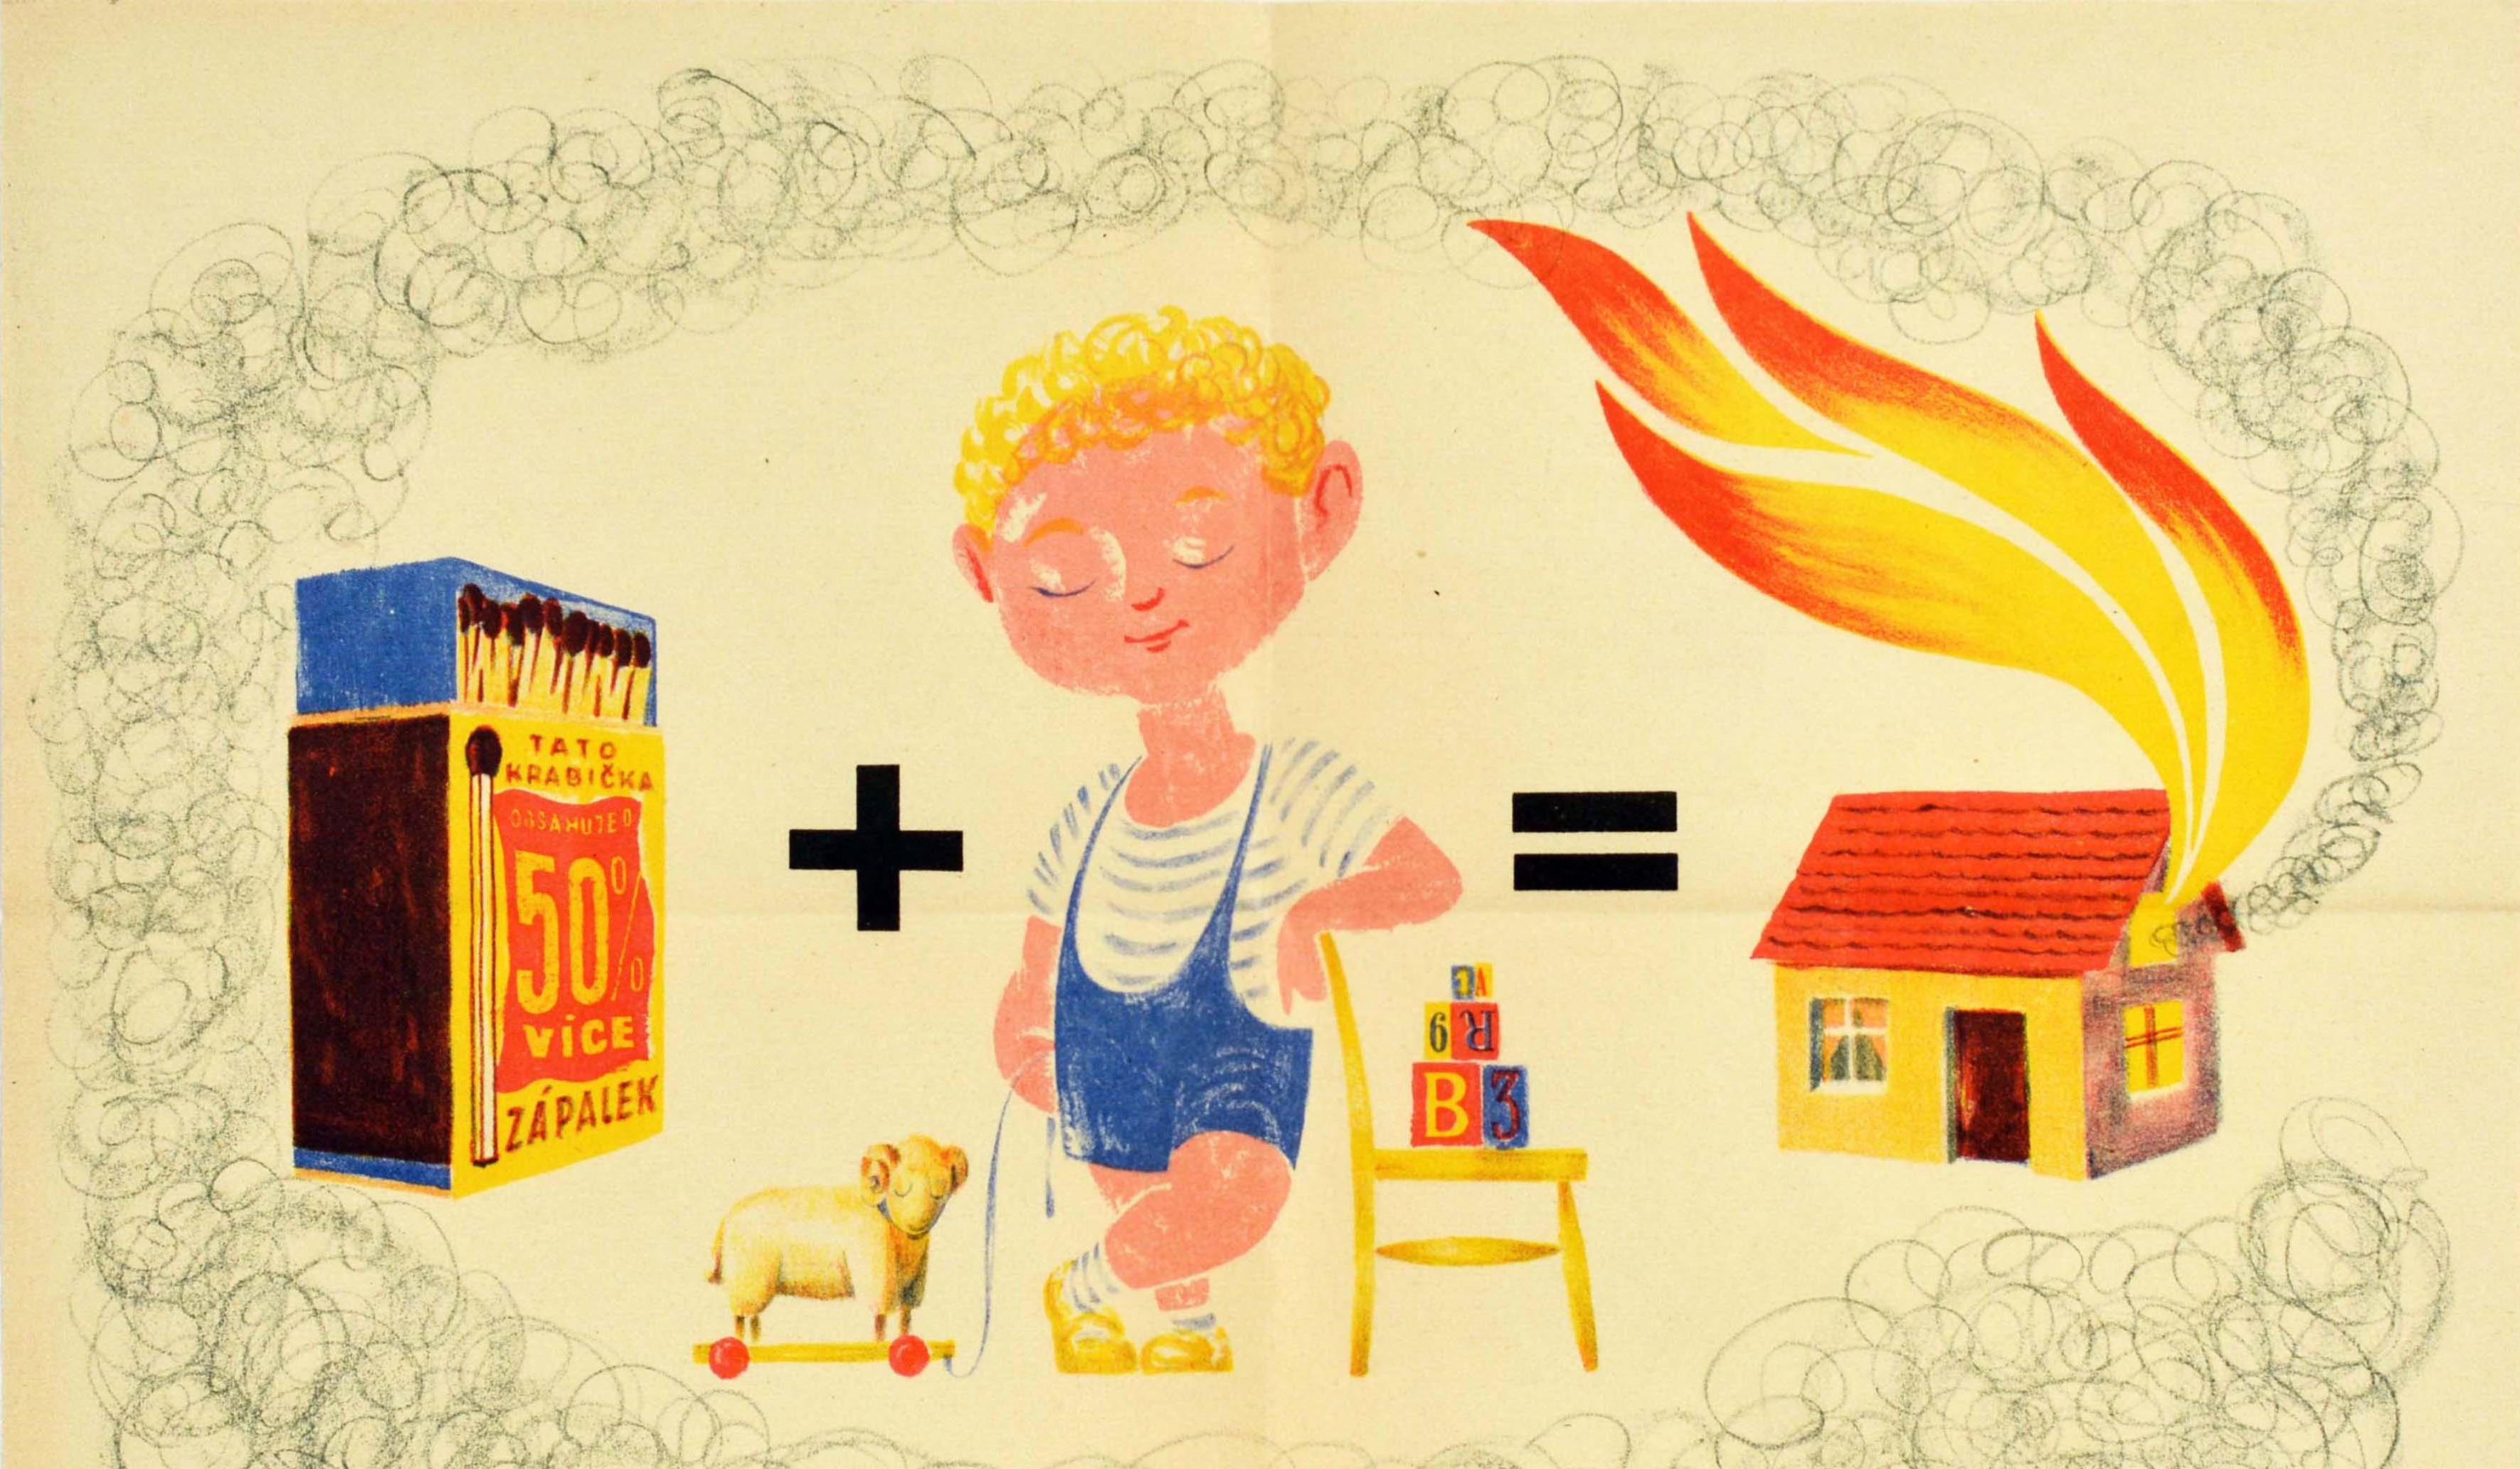 Original vintage fire safety poster published by the Czechoslovak Union of Fire Protection urging mothers to keep matches out of reach of young children featuring the bold black warning text reading Maminky - pozor! / Mothers - Caution! below a